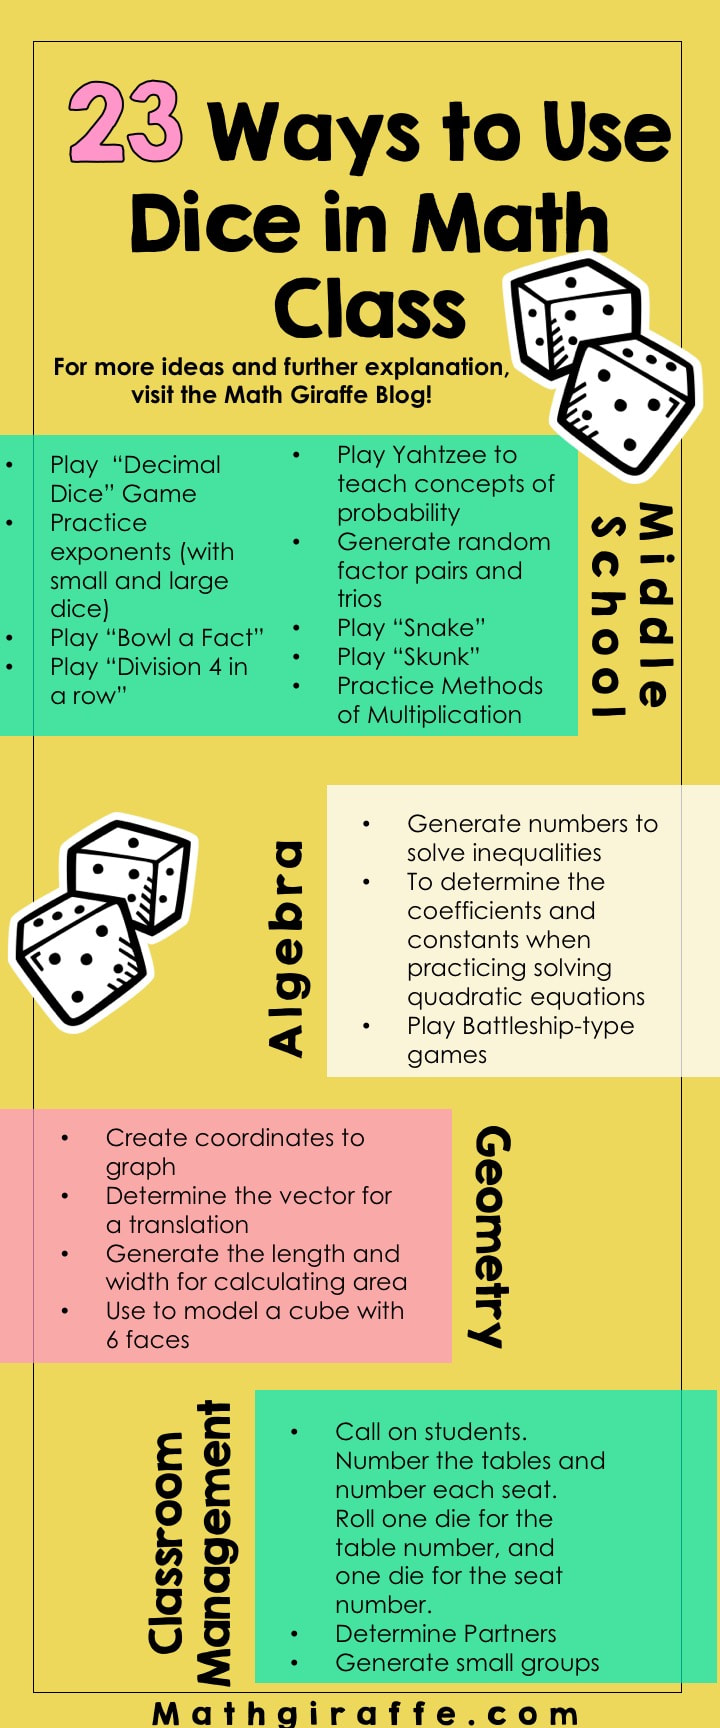 23 Ways to Use Dice in Math Class